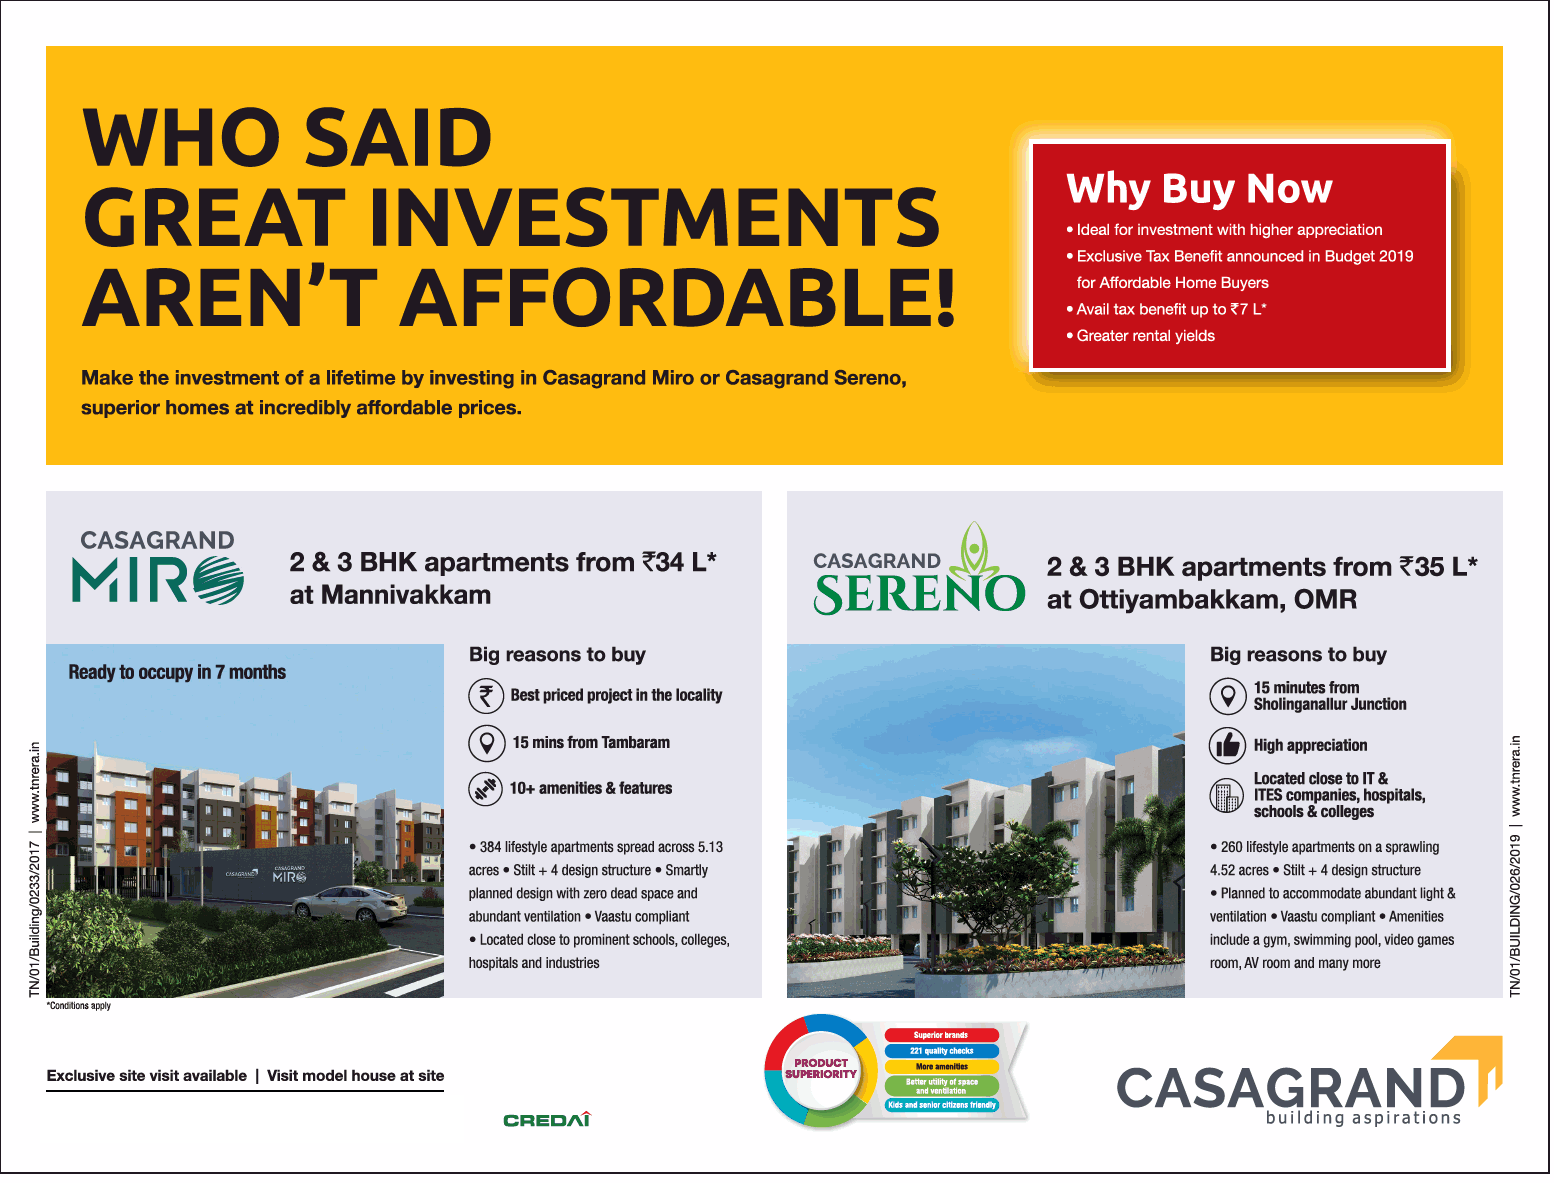 Casagrand Miro or Casagrand Sereno, superior homes at incredibly affordable prices in Chennai Update